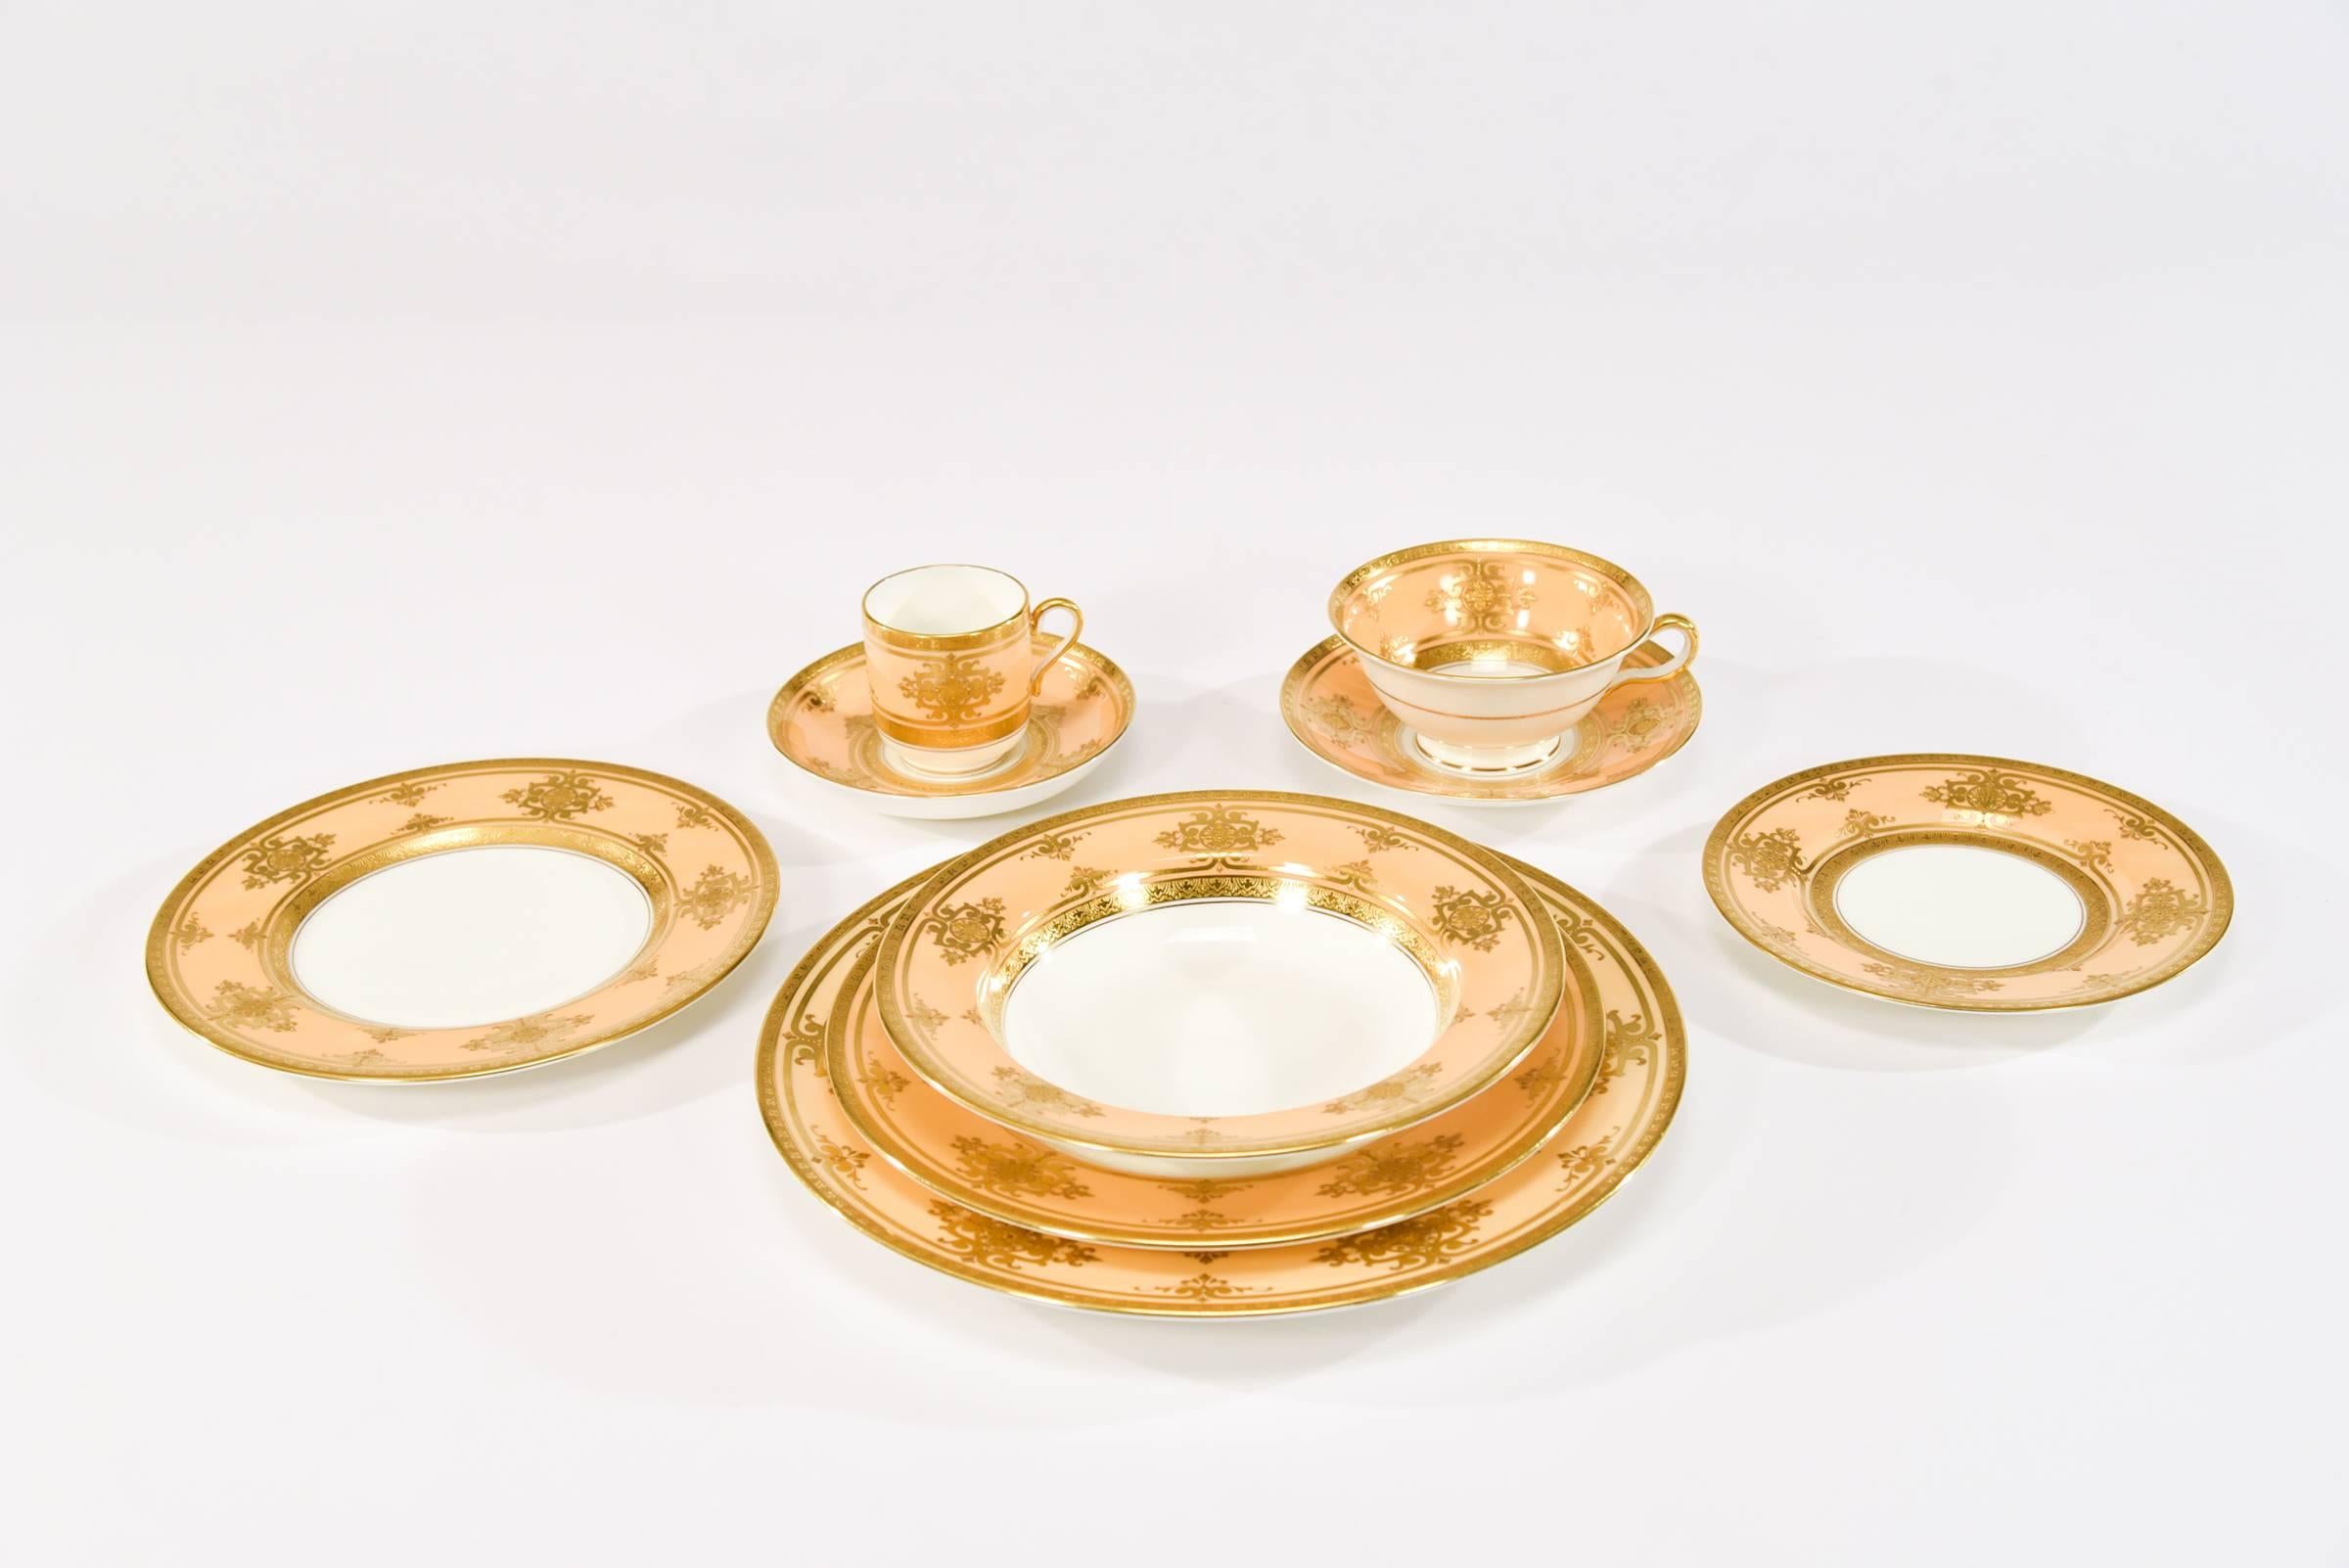 As we approach the holiday season, this complete Minton for Tiffany dinner service for 12 will work with many decorating themes to dress up any event. The warm butterscotch border frames a clean white center and is decorated with an elegant